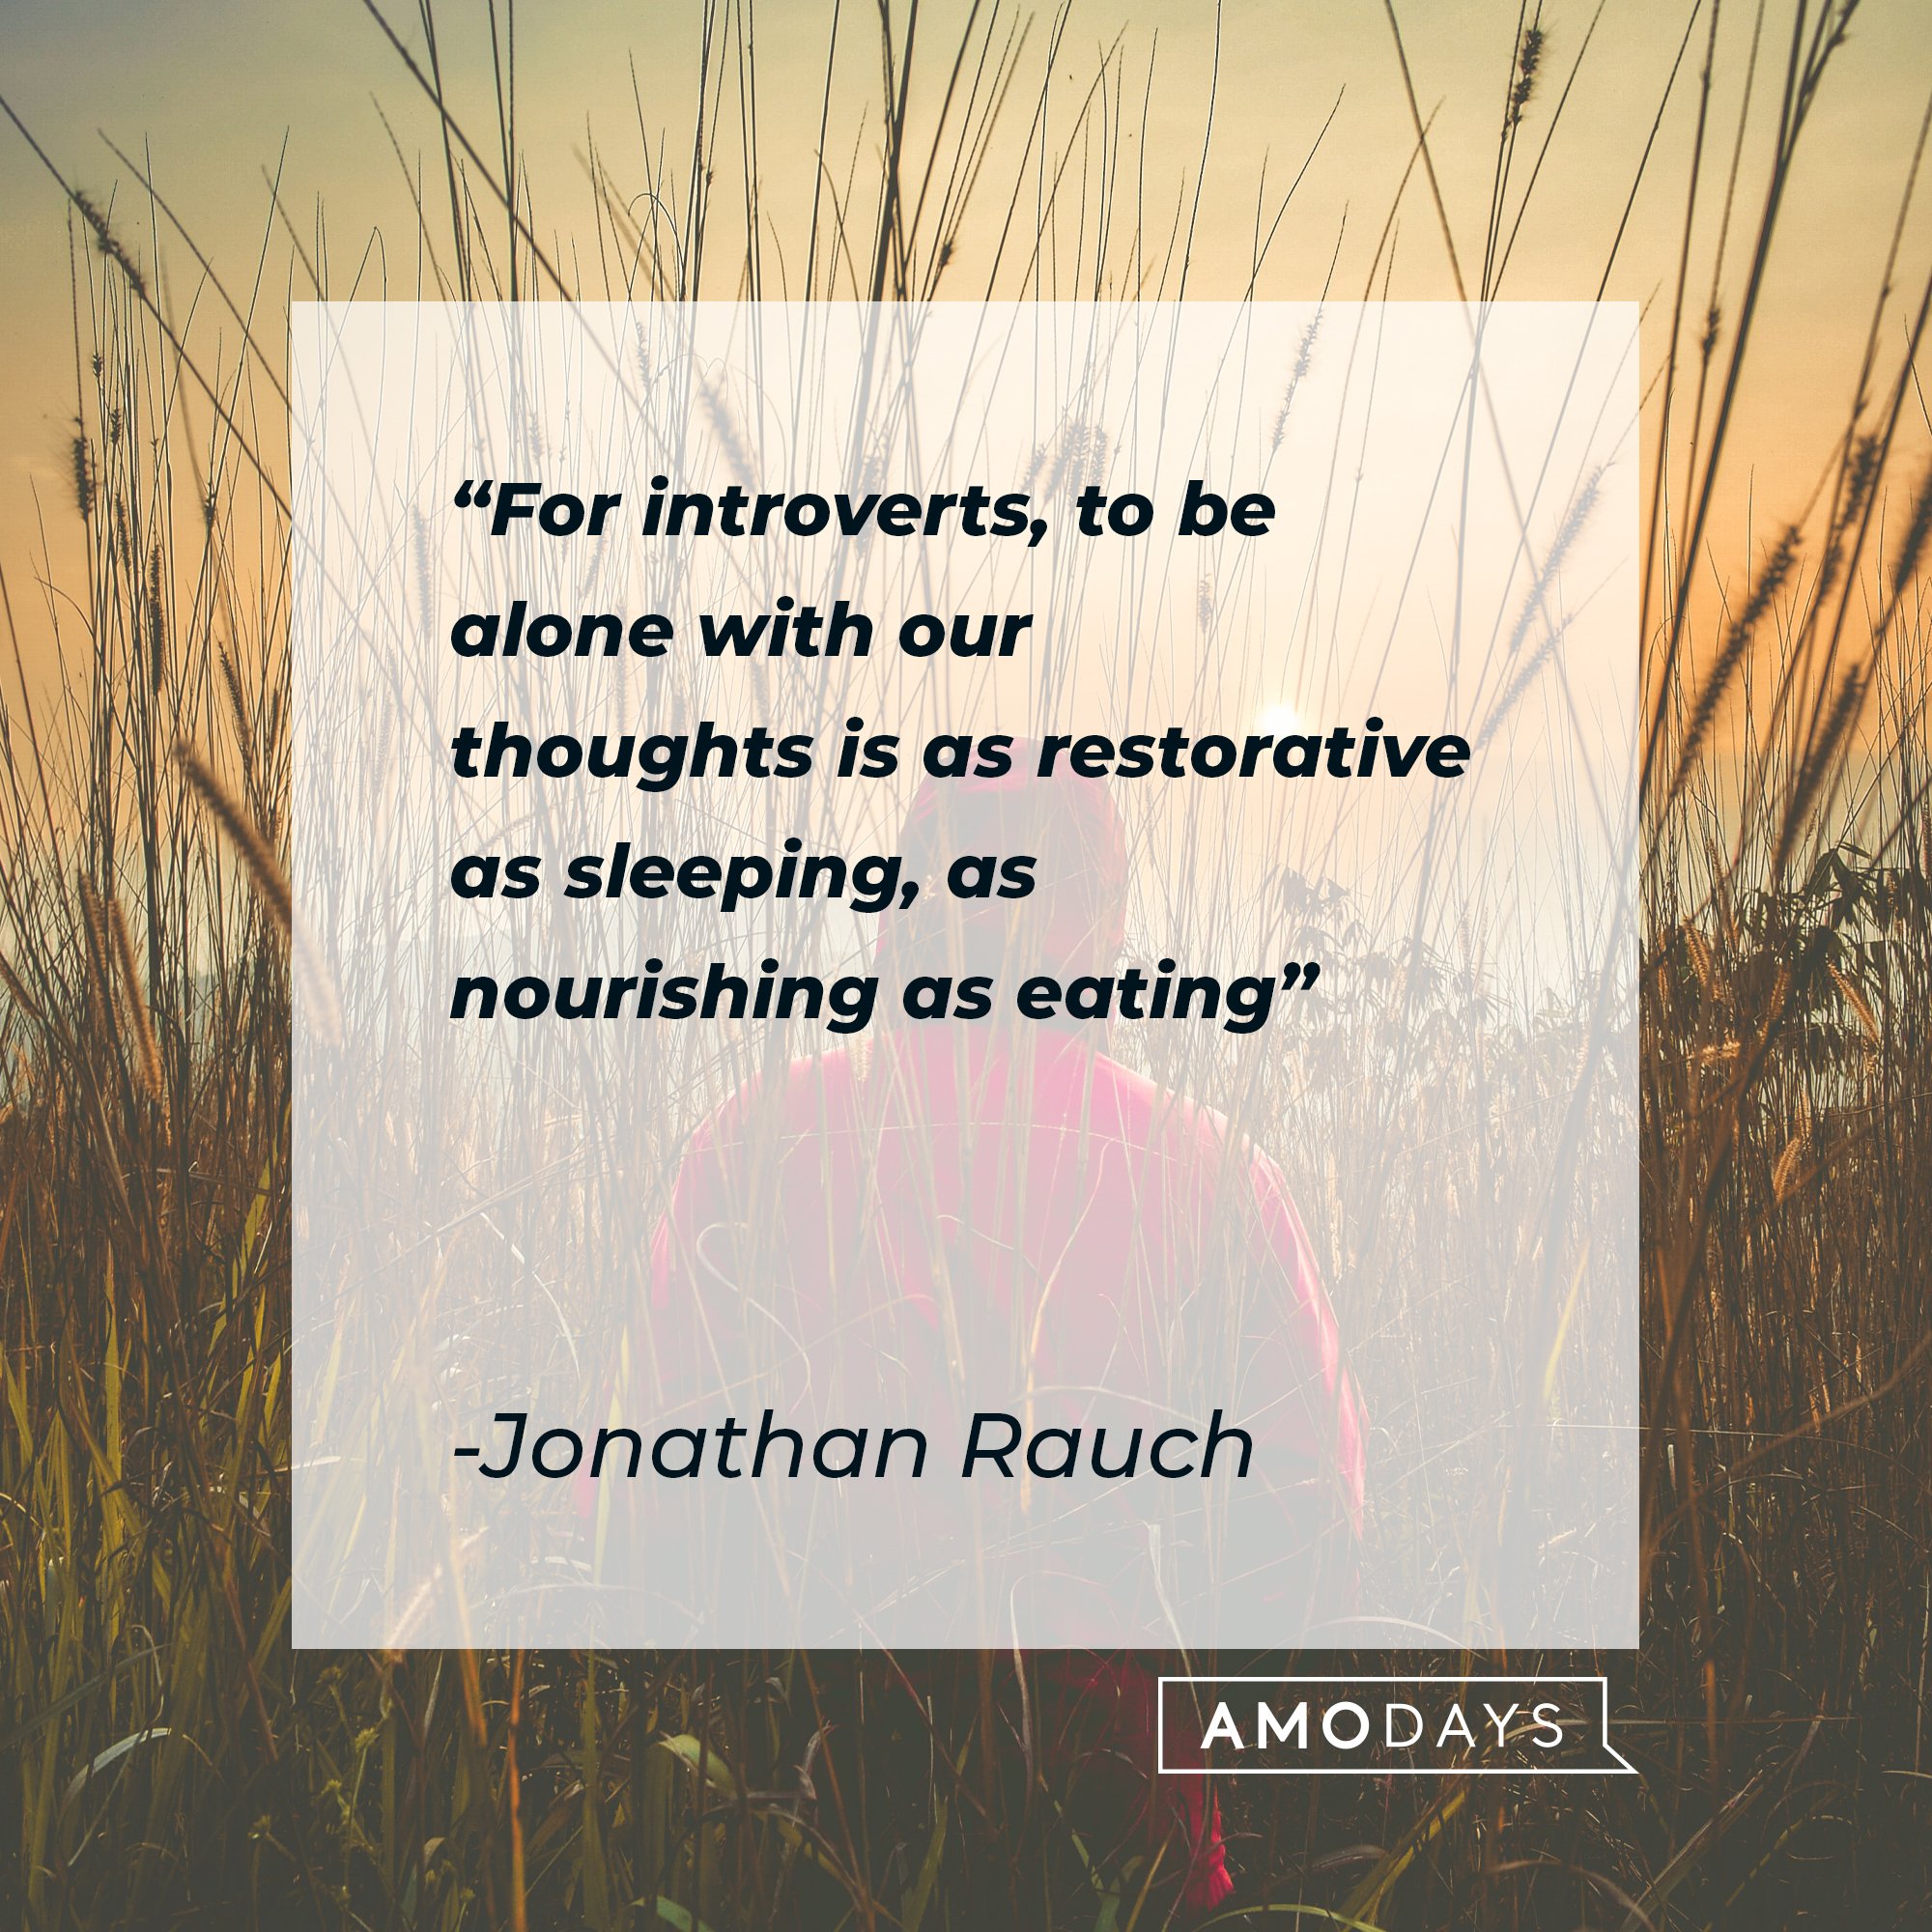 Jonathan Rauch’s quote: "For introverts, to be alone with our thoughts is as restorative as sleeping, as nourishing as eating." | Image: AmoDays 